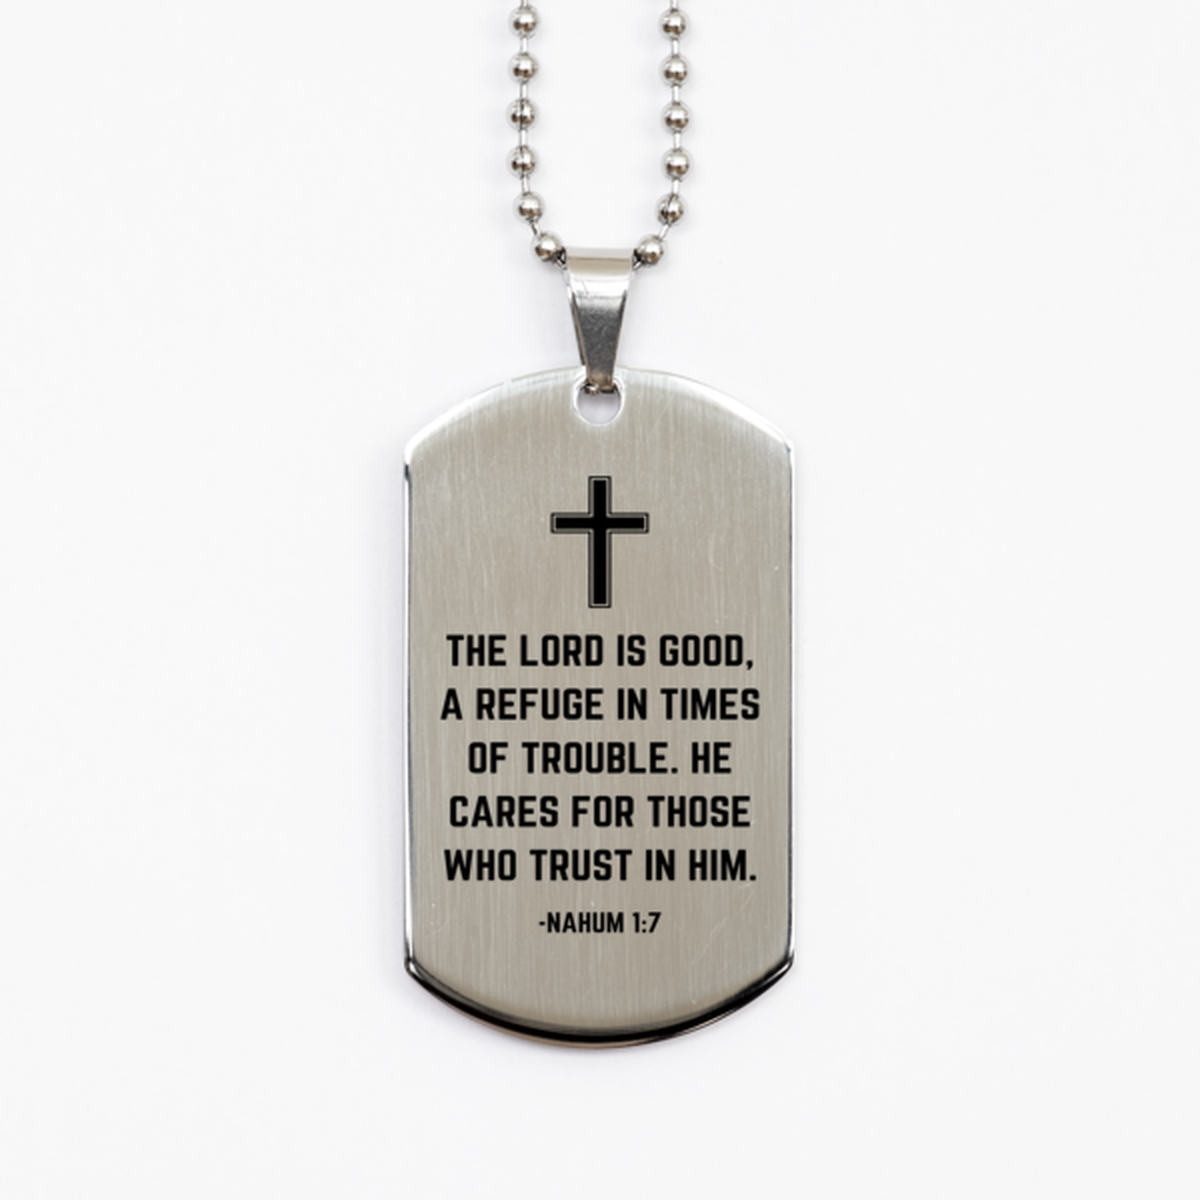 Baptism Gifts For Teenage Boys Girls, Christian Bible Verse Silver Dog Tag, The Lord is good, Confirmation Gifts, Bible Verse Necklace for Son, Godson, Grandson, Nephew